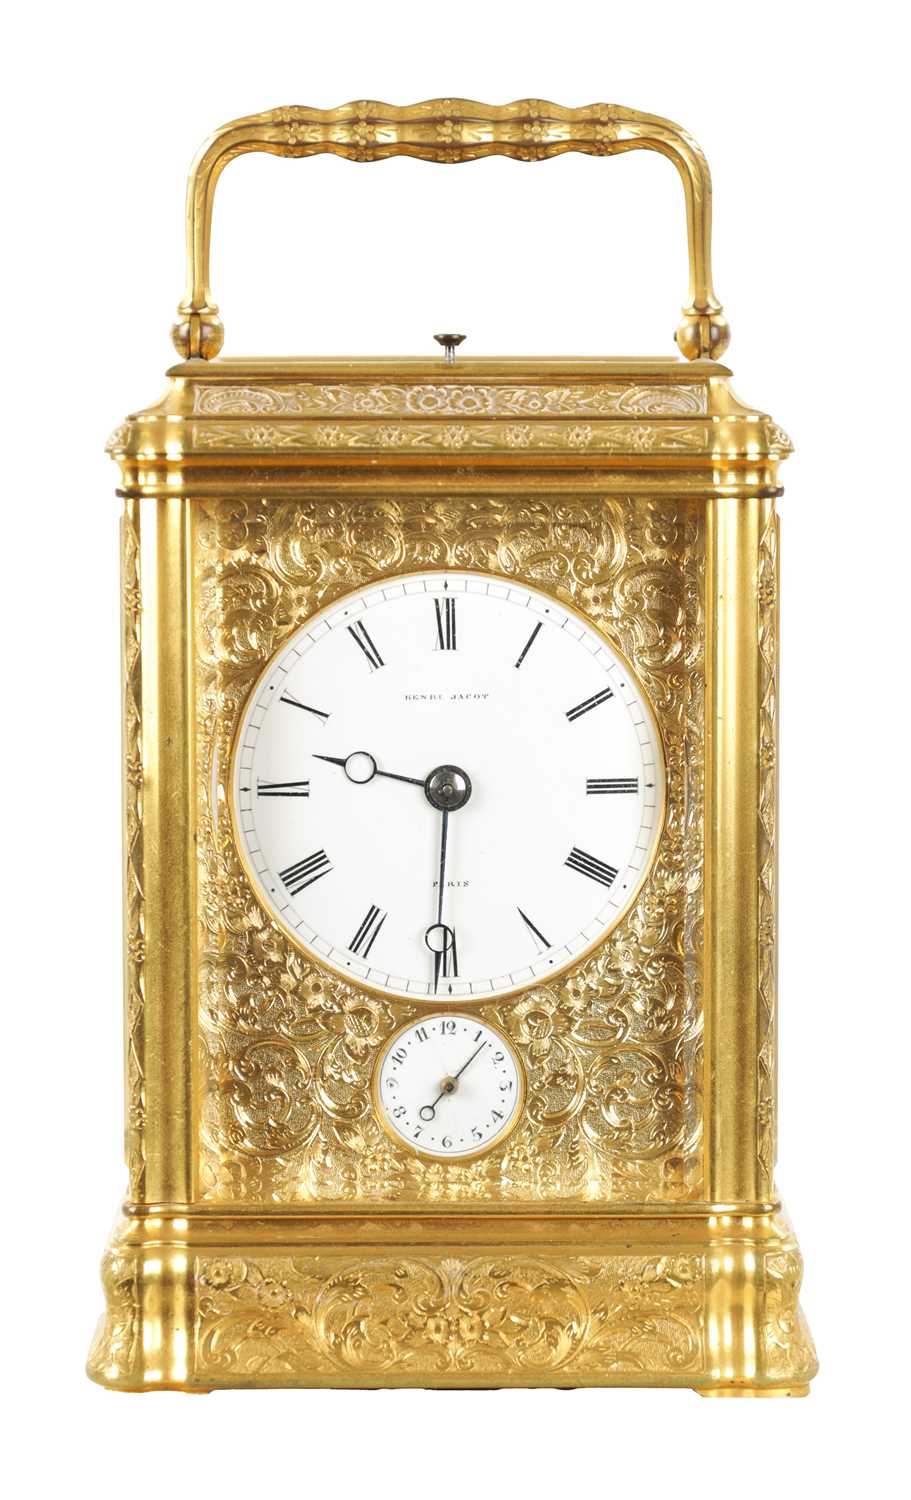 HENRI JACOT, PARIS. A LATE 19TH CENTURY FRENCH GRAND SONNERIE CARRIAGE CLOCK